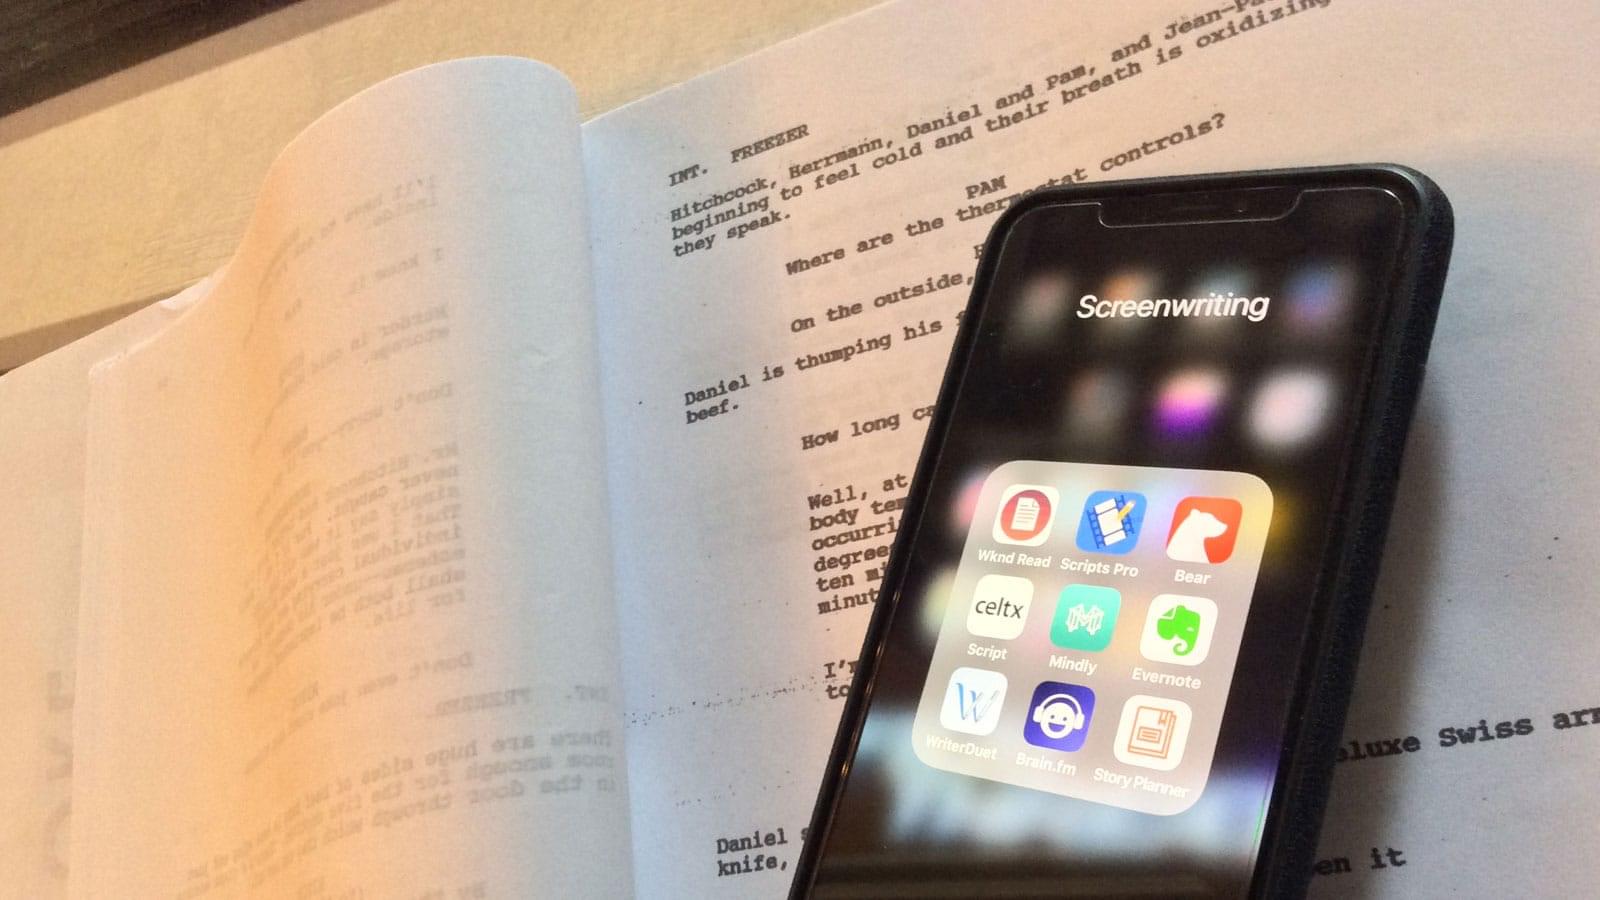 FEAT-Screenwriting-Apps-04 Image